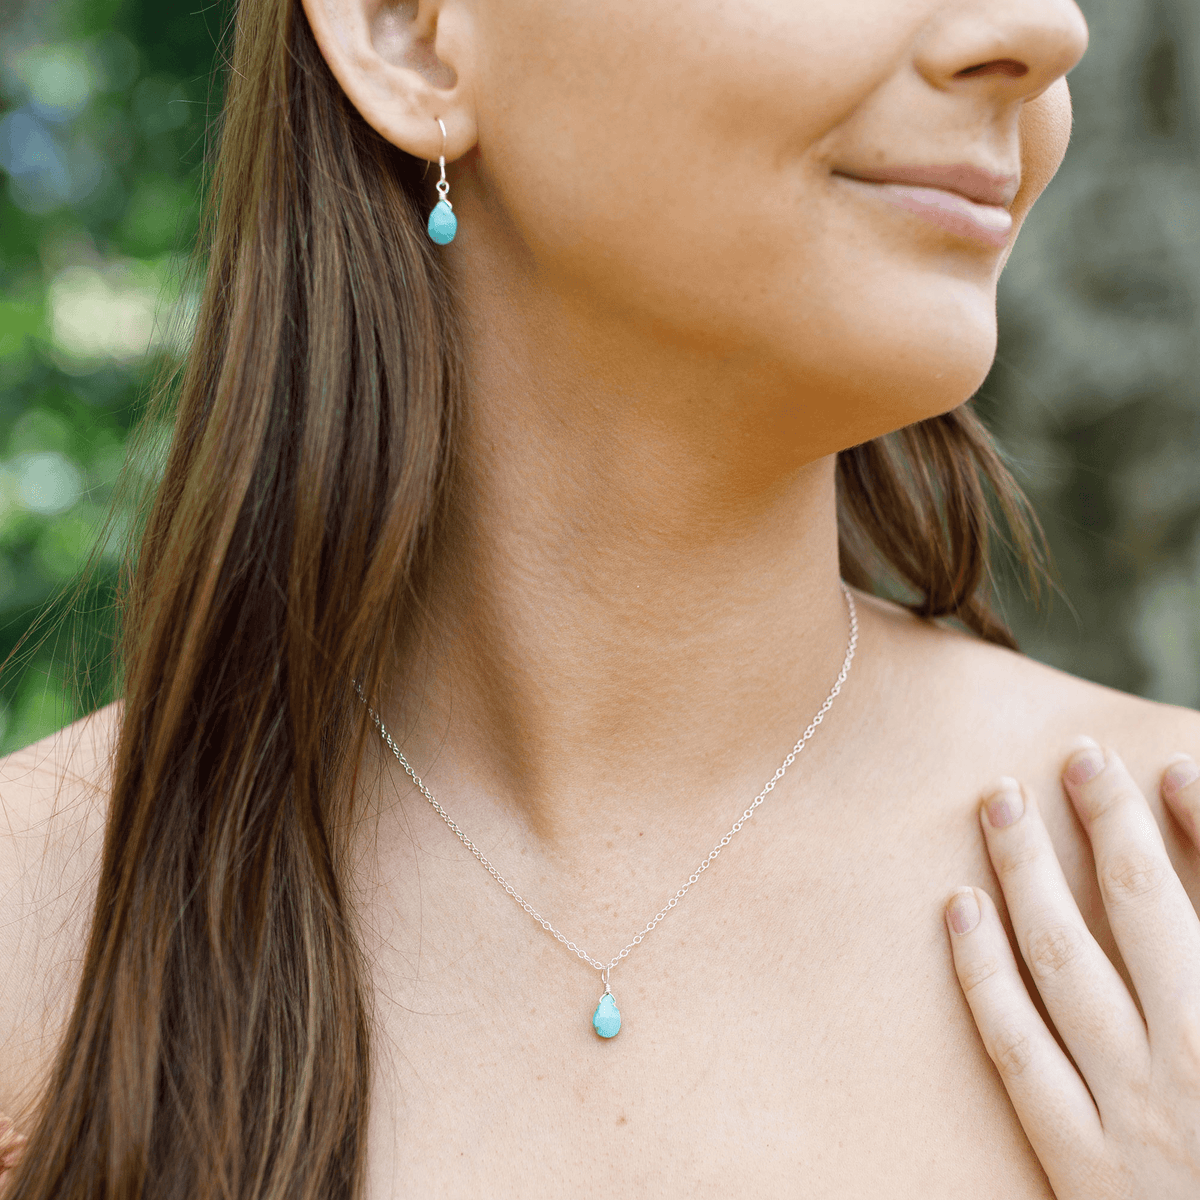 Turquoise Tiny Teardrop Earrings & Necklace Set - Turquoise Tiny Teardrop Earrings & Necklace Set - Sterling Silver / Cable - Luna Tide Handmade Crystal Jewellery